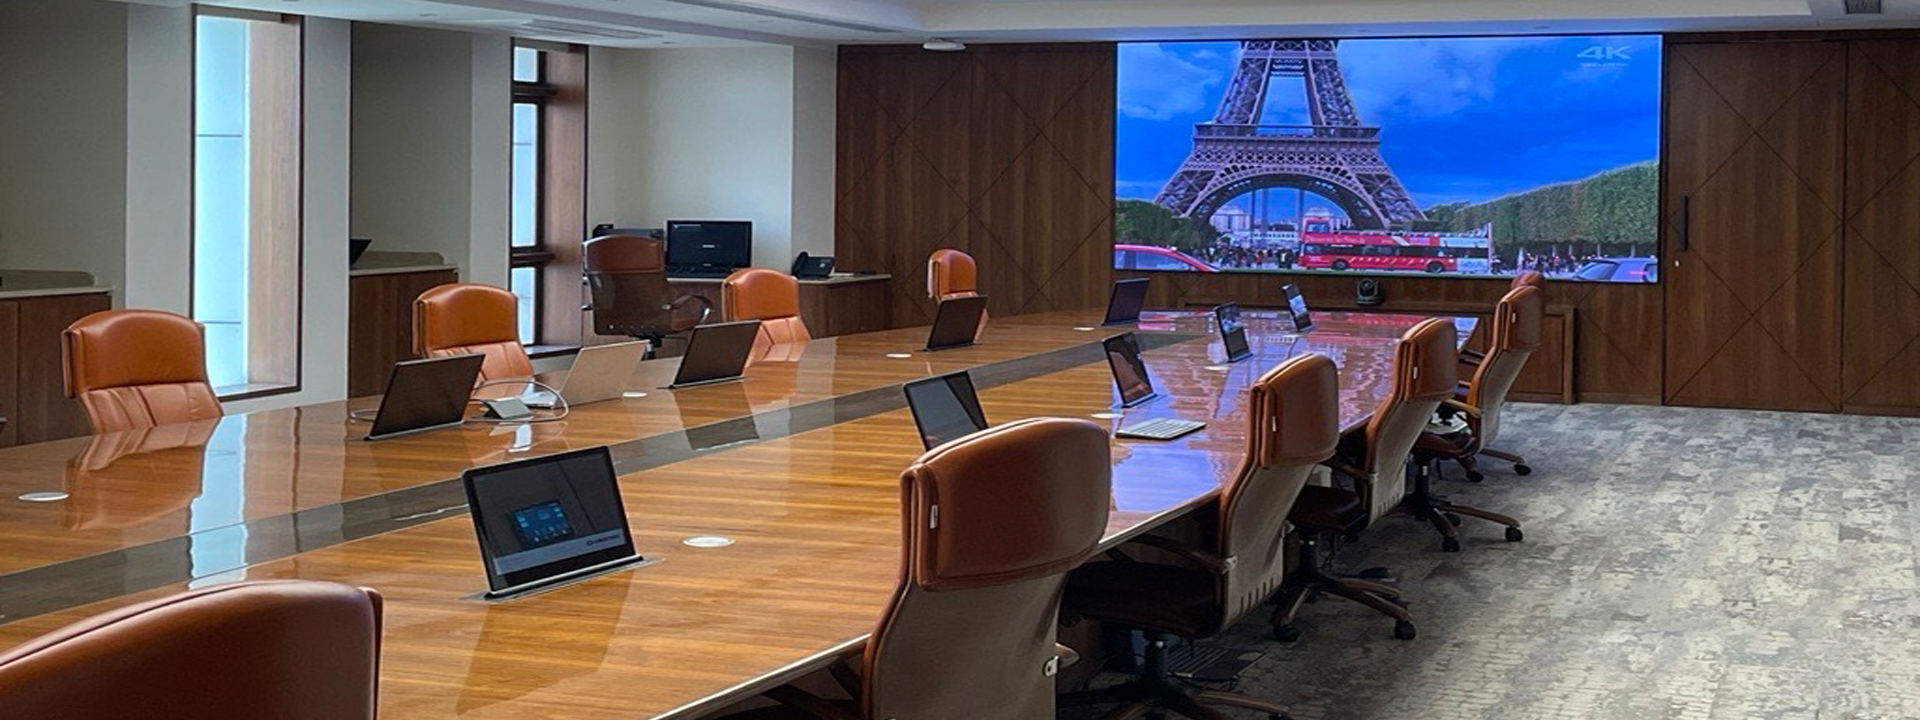 India's First Small Pitch LED Video Wall by Xtreme Media at SBI Boardroom